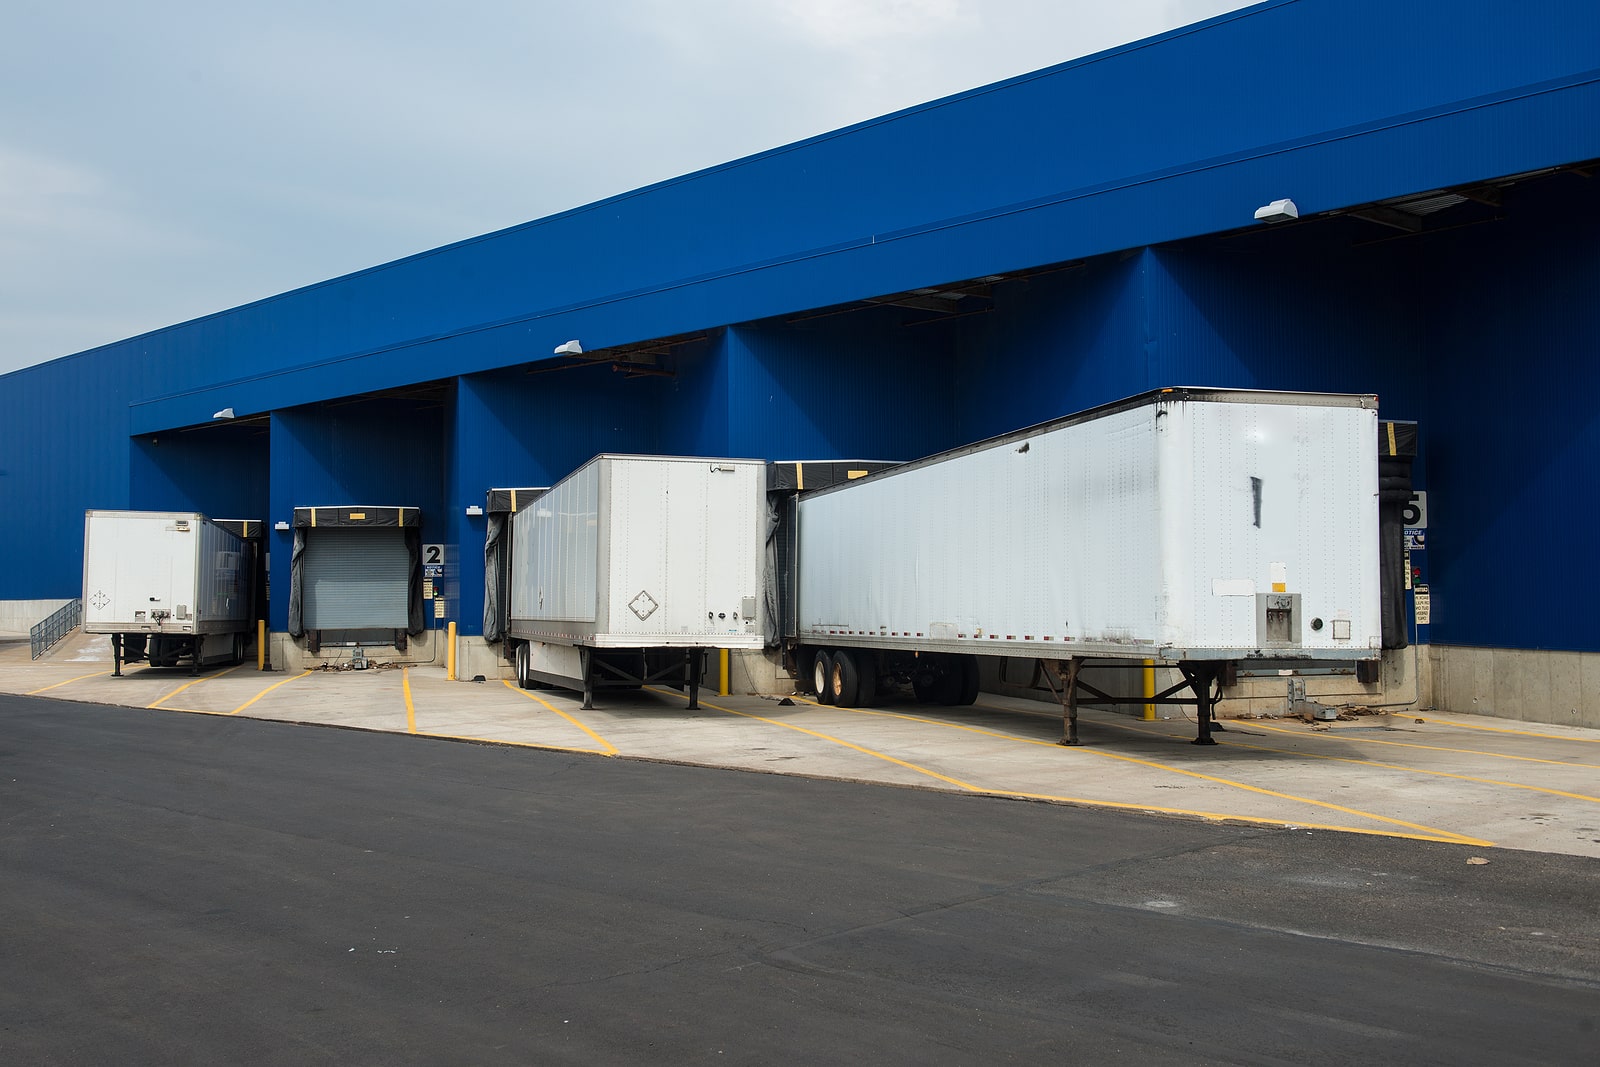 Image of storage trailers behind a building